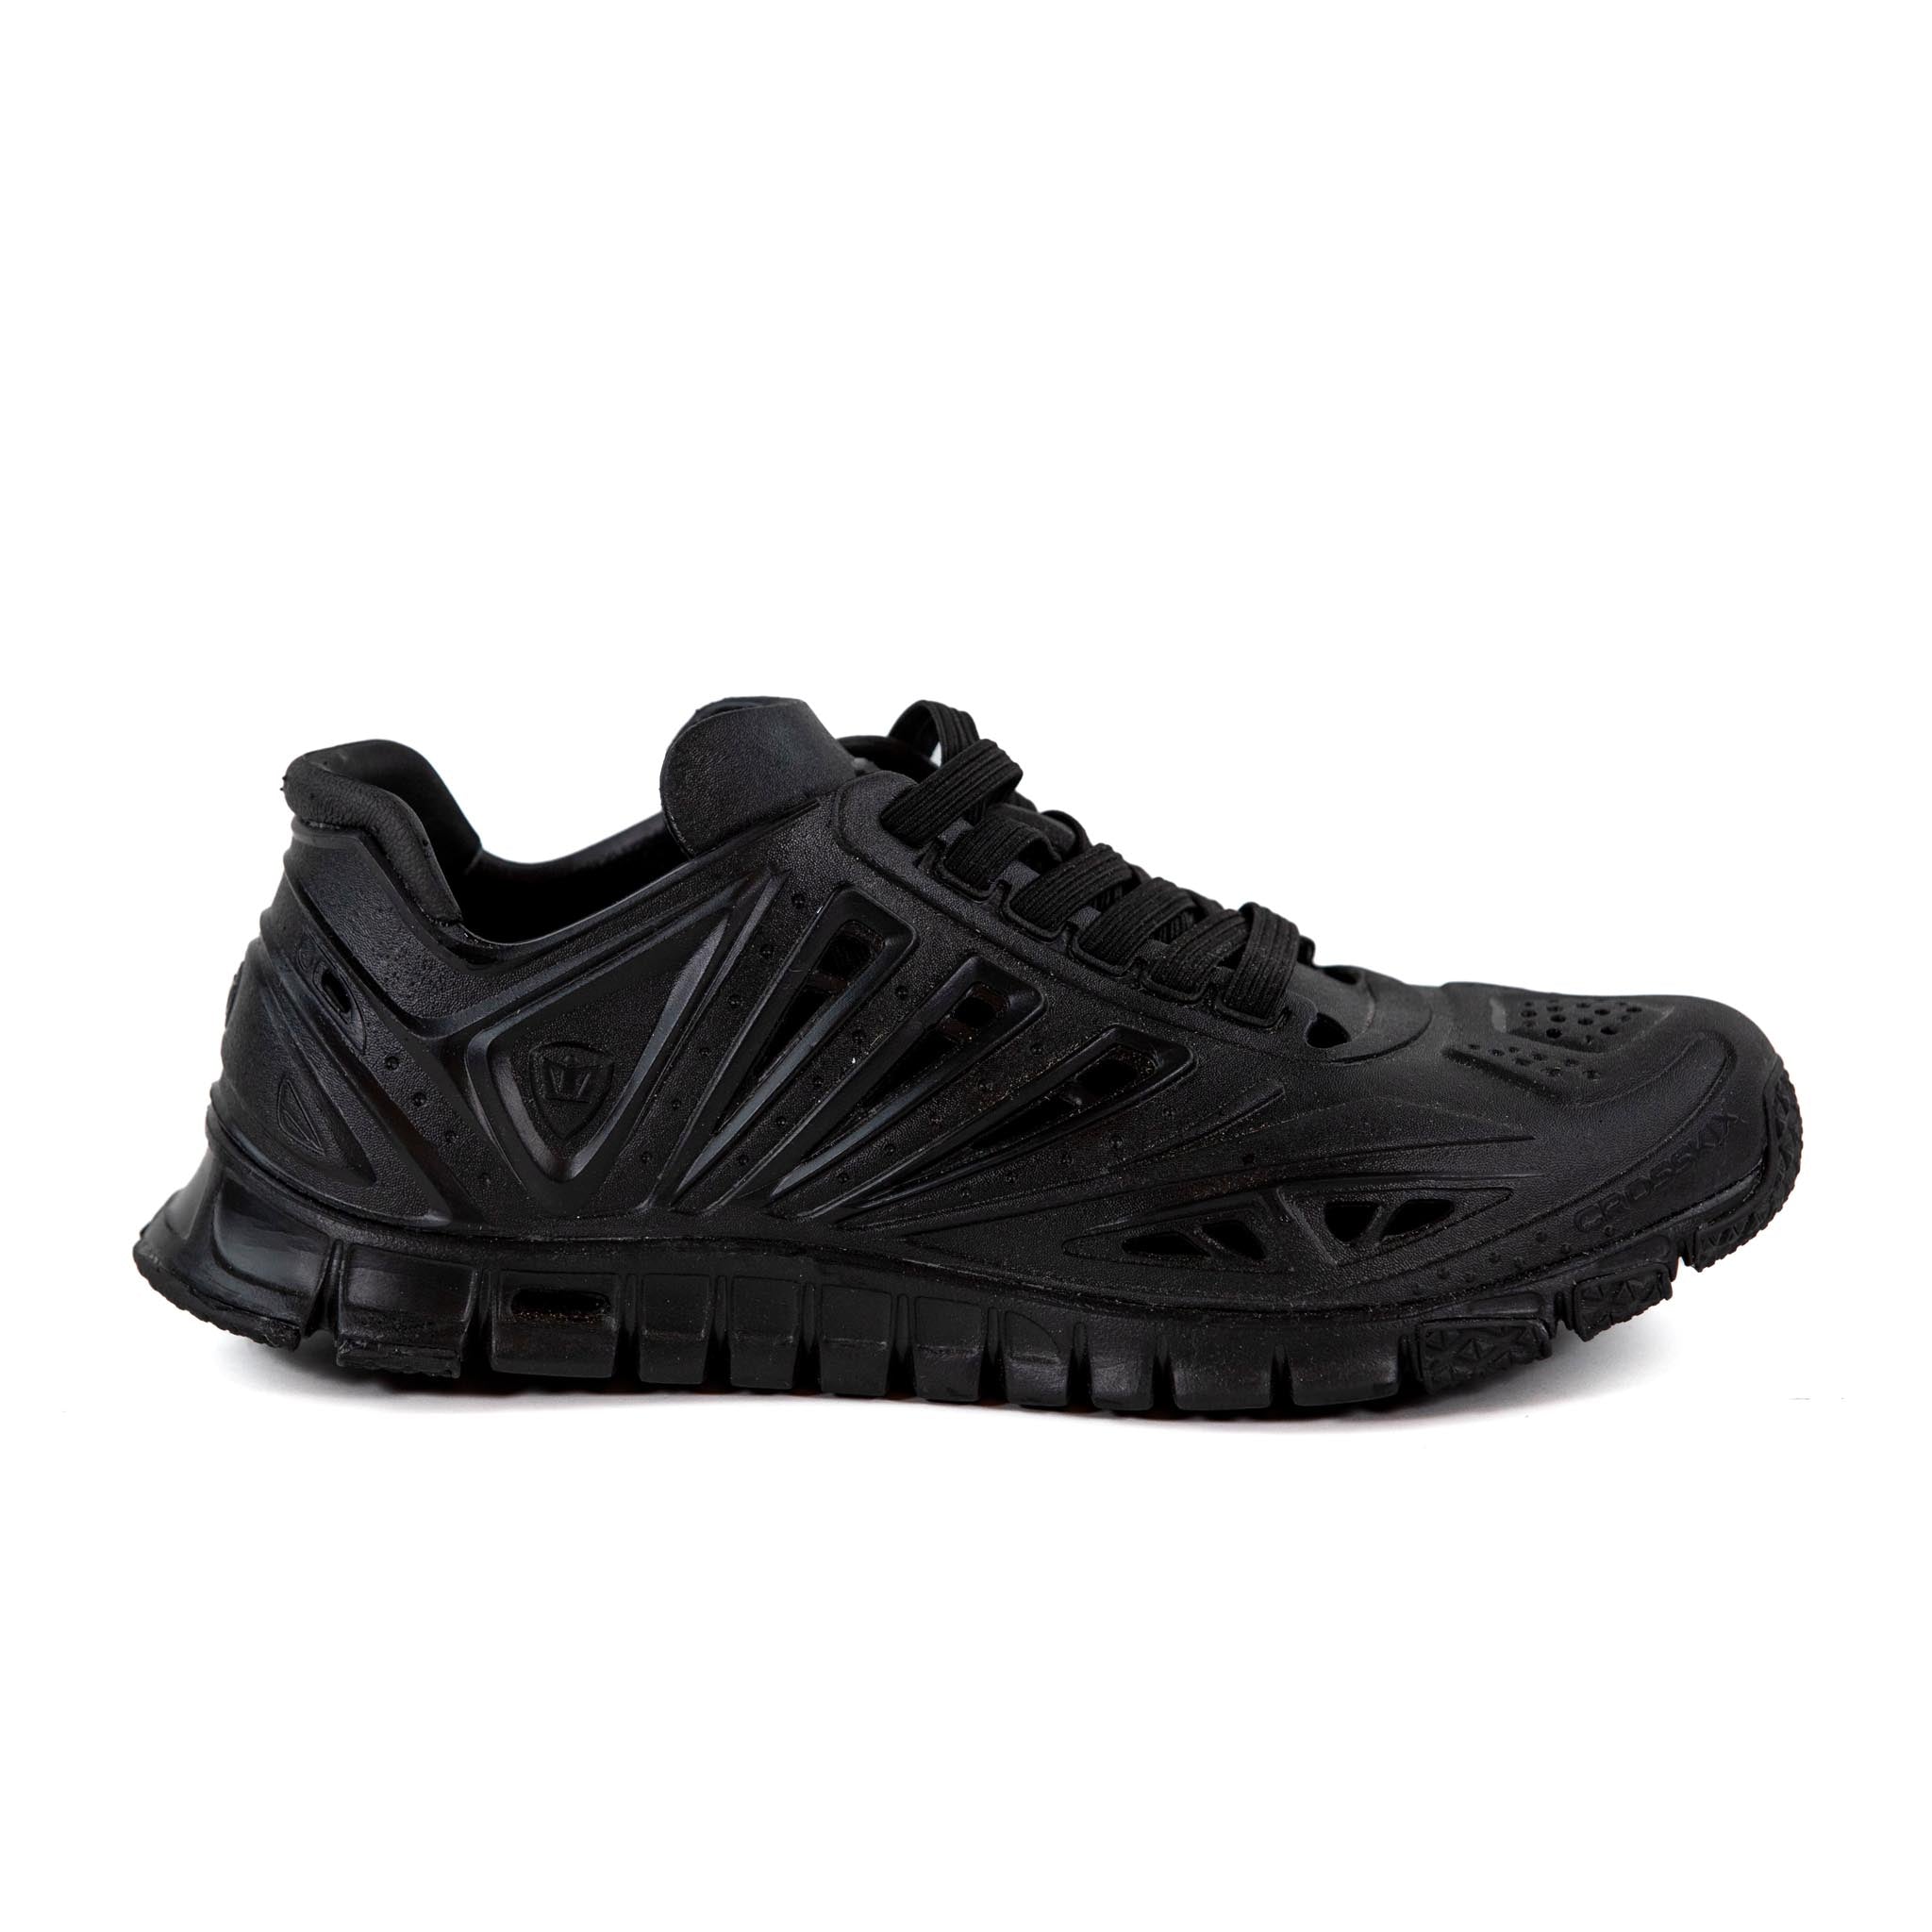 APX Closed Toe Lace Up Water Shoes for Women